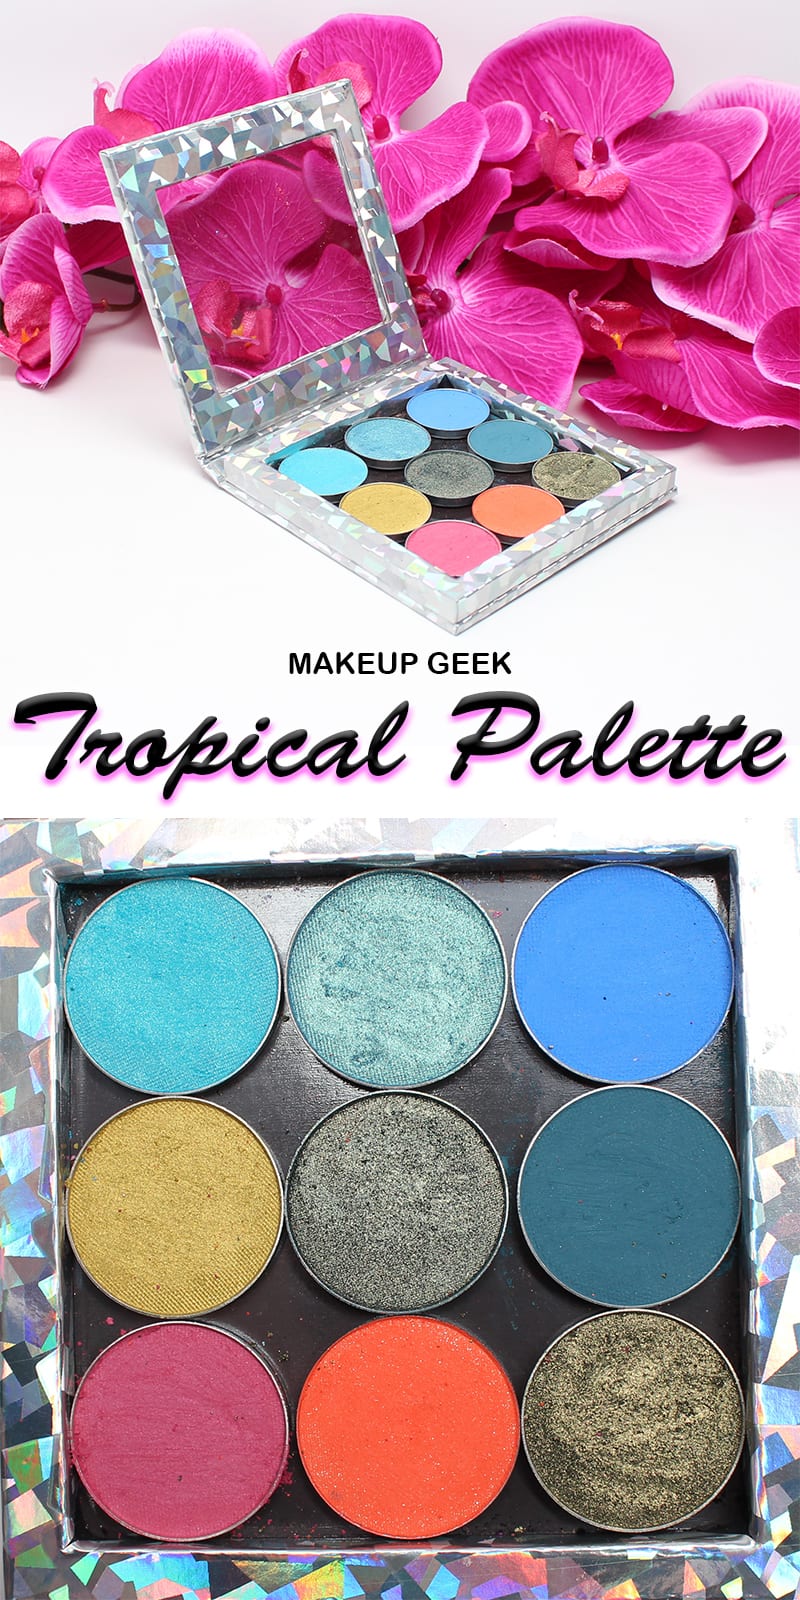 Makeup Geek Tropical Palette Review Swatches Dupes